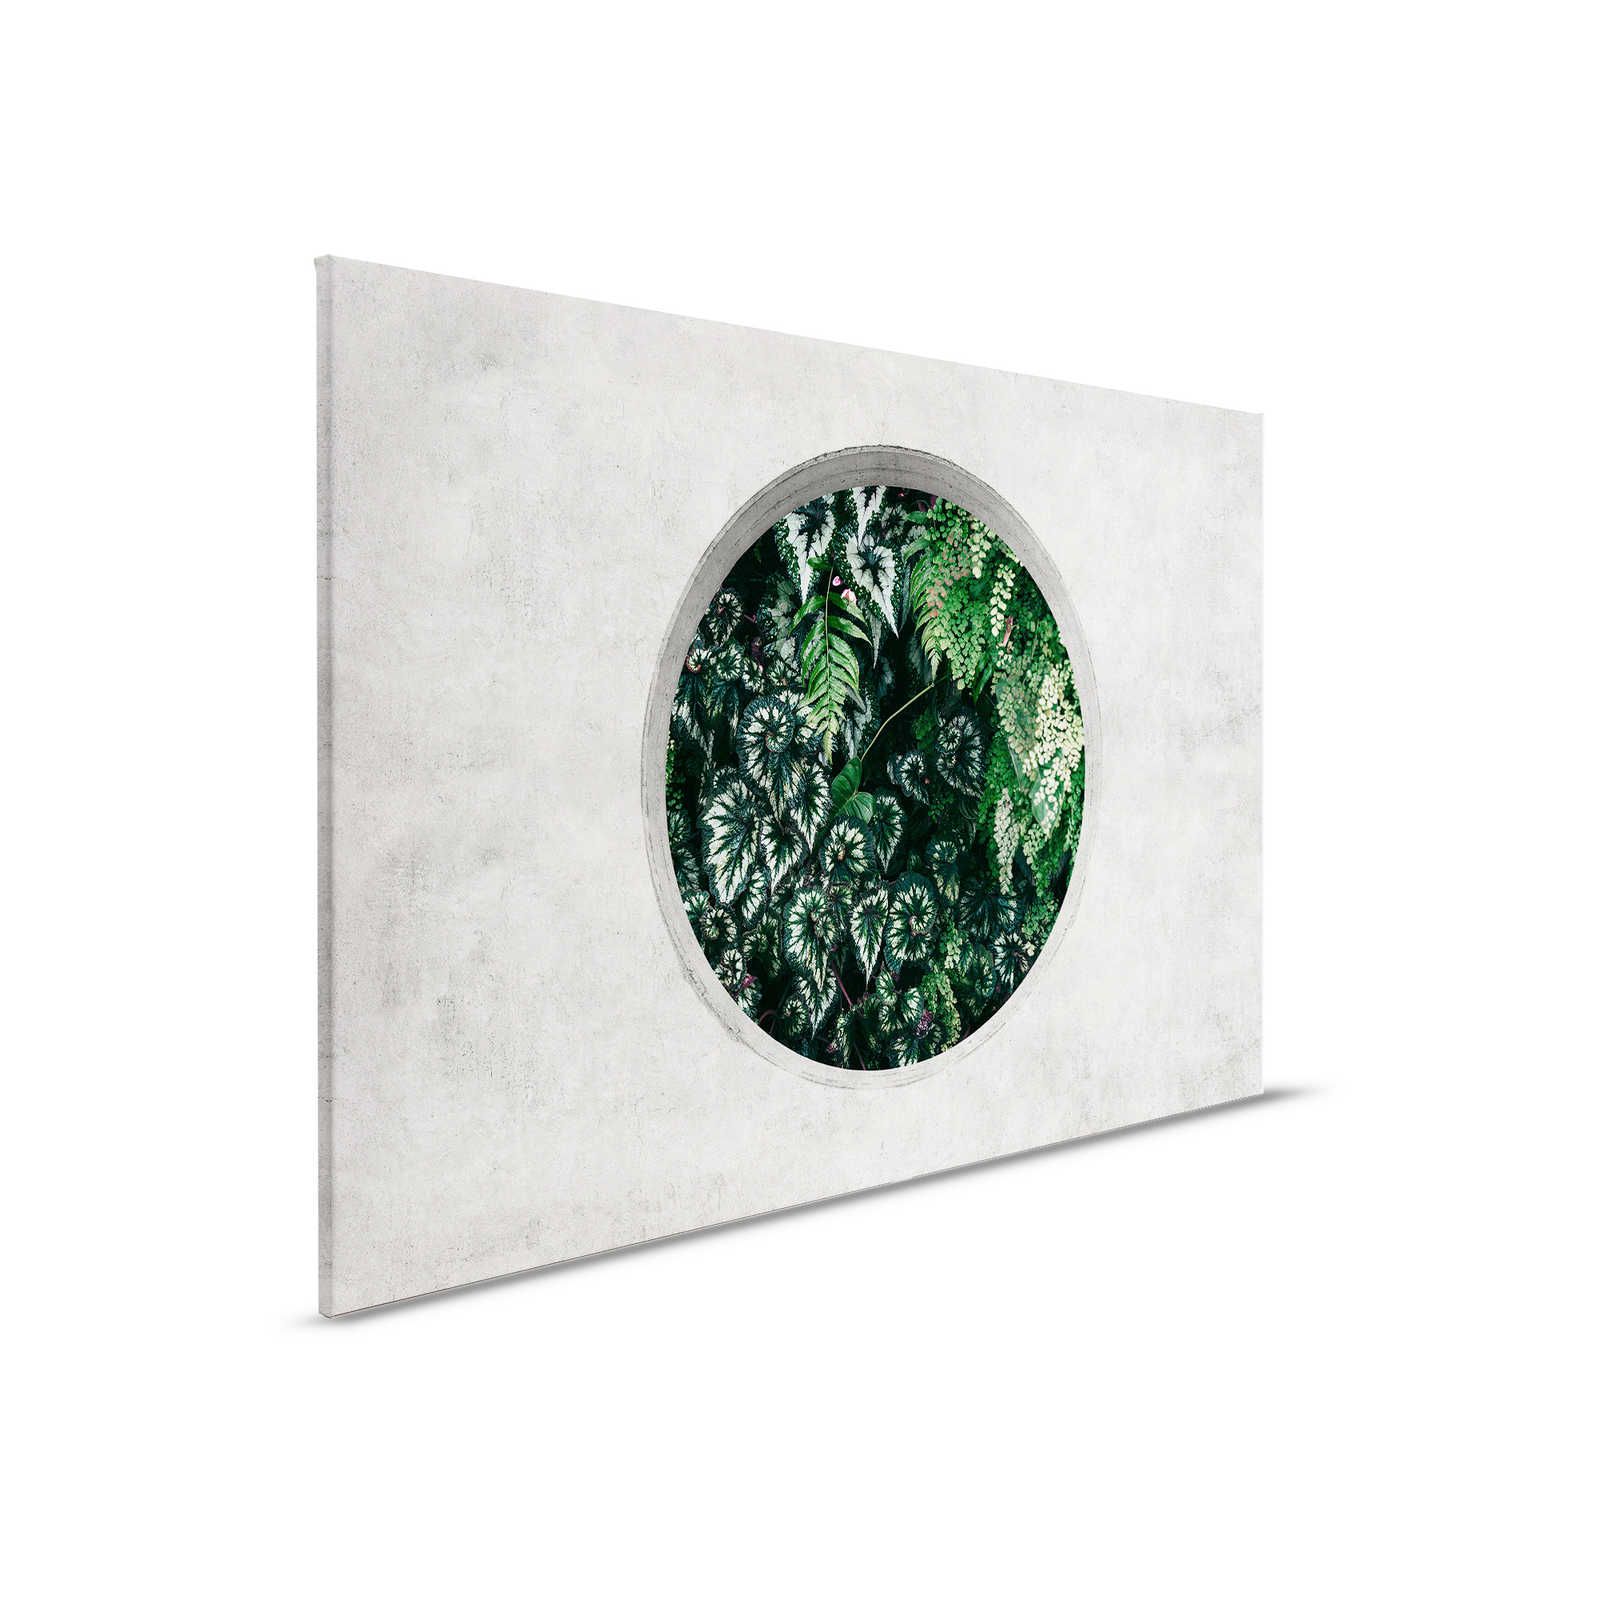         Deep Green 1 - Canvas painting Window Round with Jungle Plants - 0,90 m x 0,60 m
    